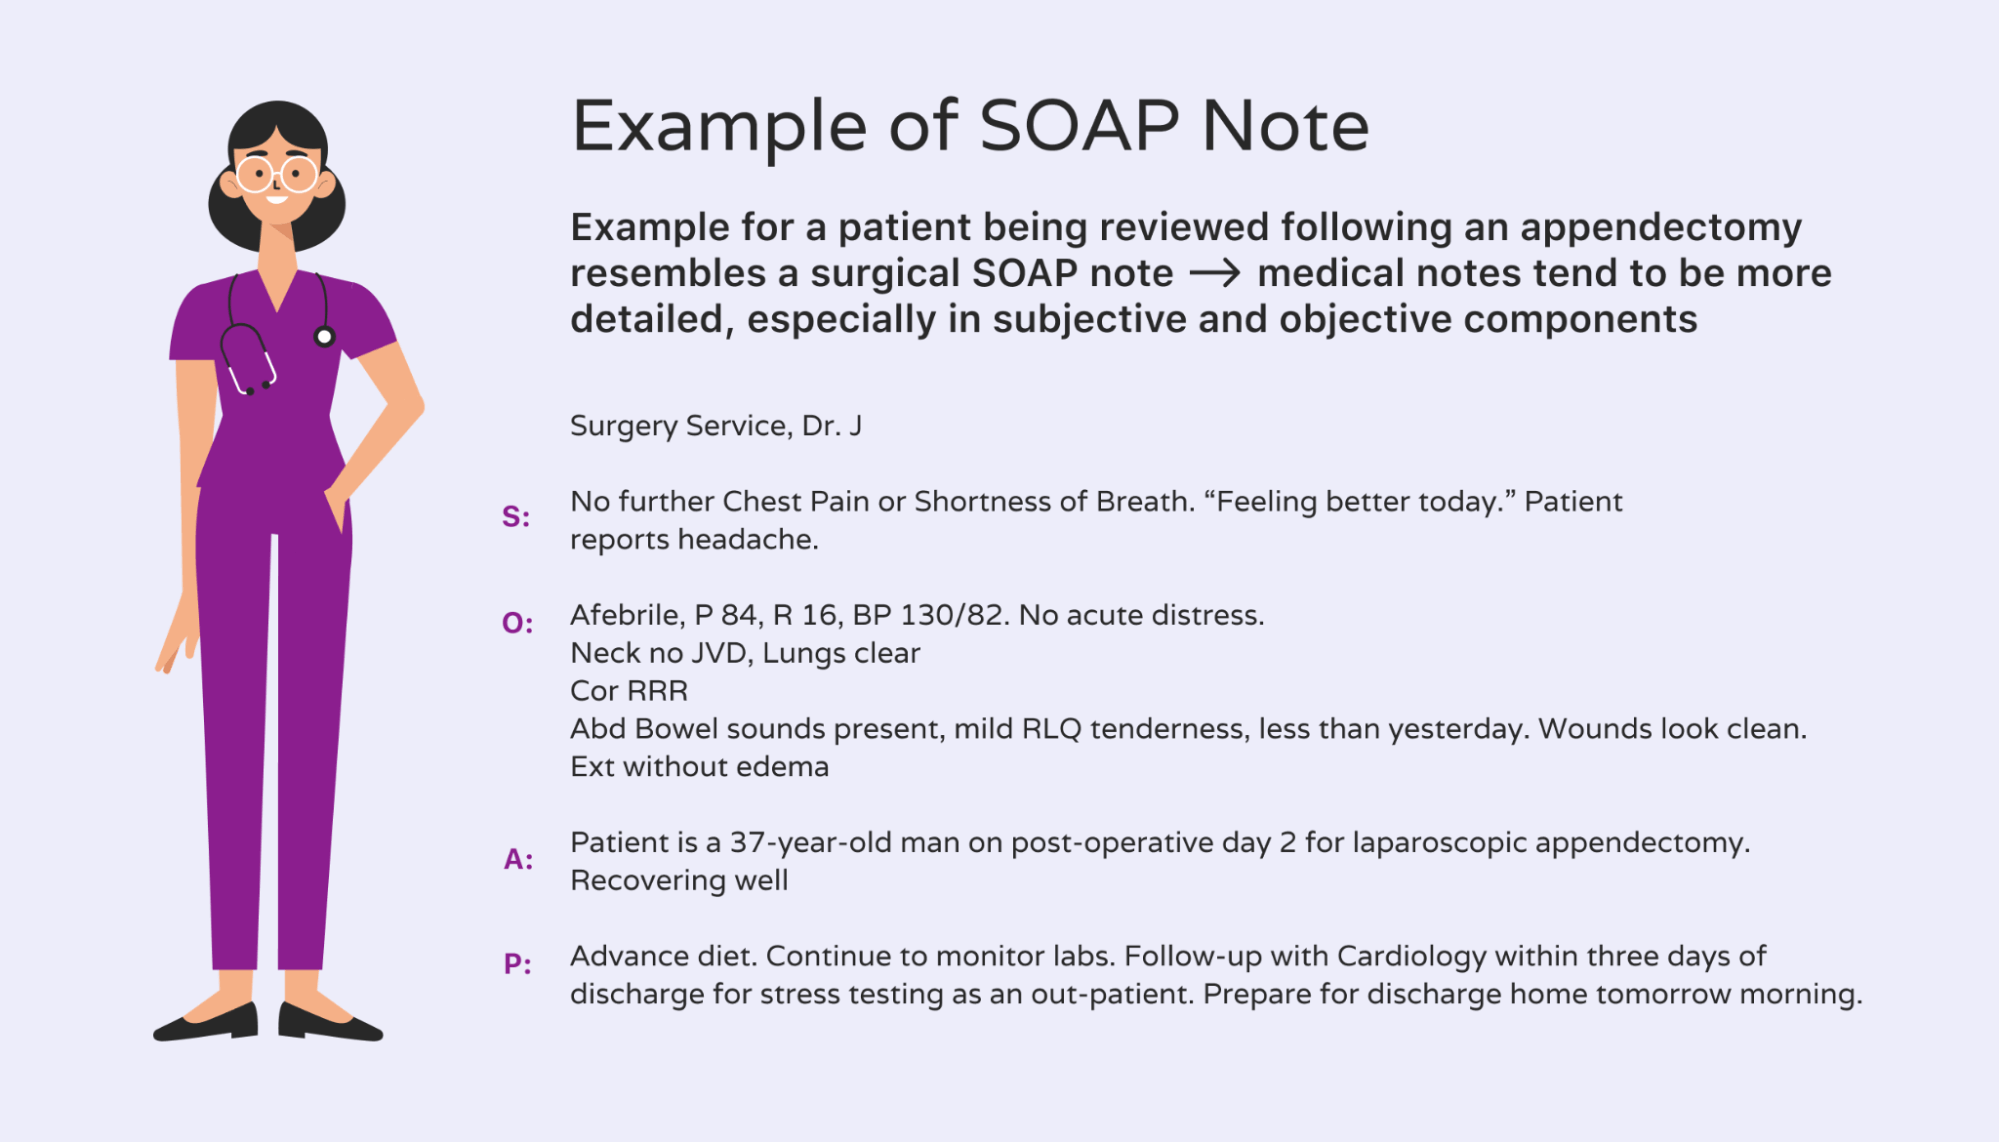 Soap note example